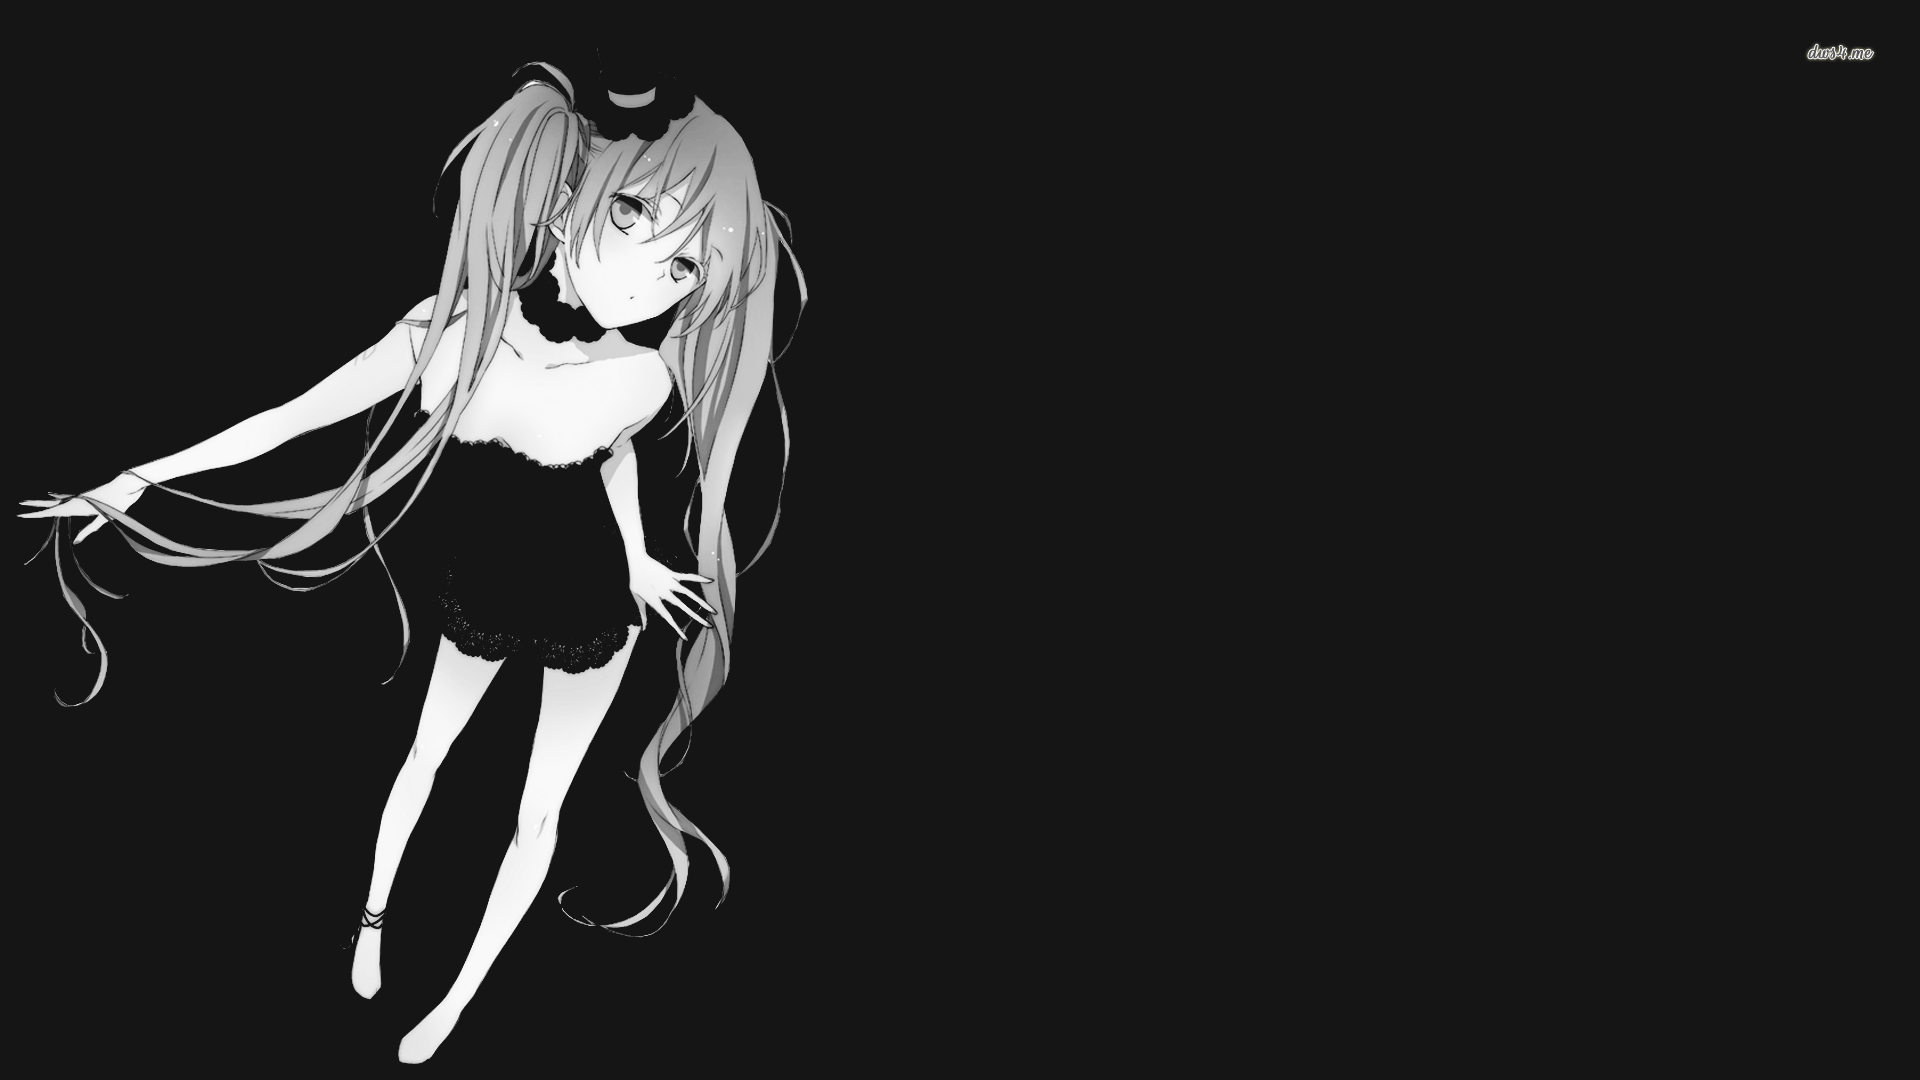 Black White Anime Wallpapers Top Free Black White Anime Backgrounds Wallpaperaccess